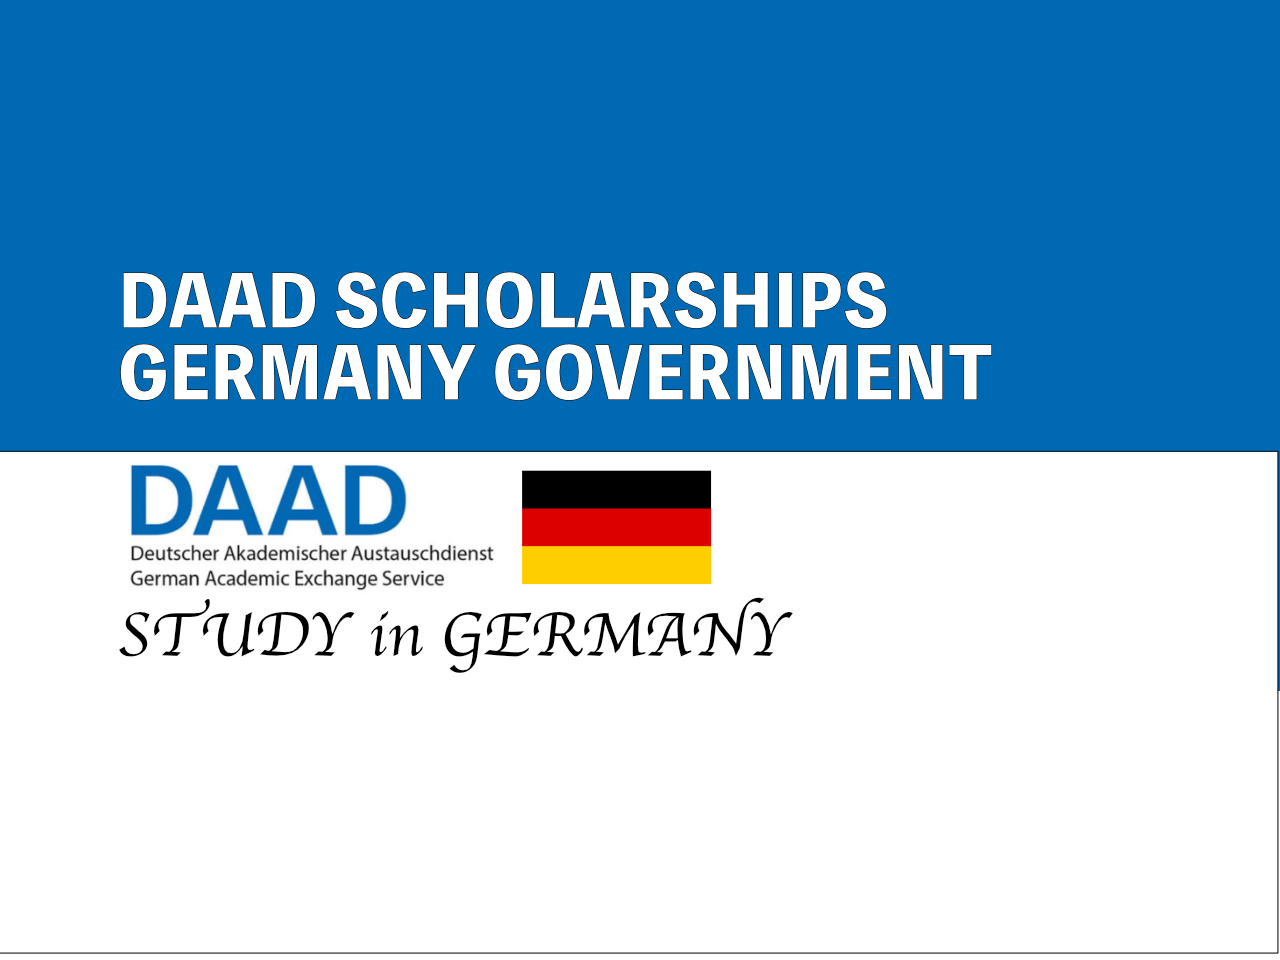 DAAD Germany Scholarships fully funded